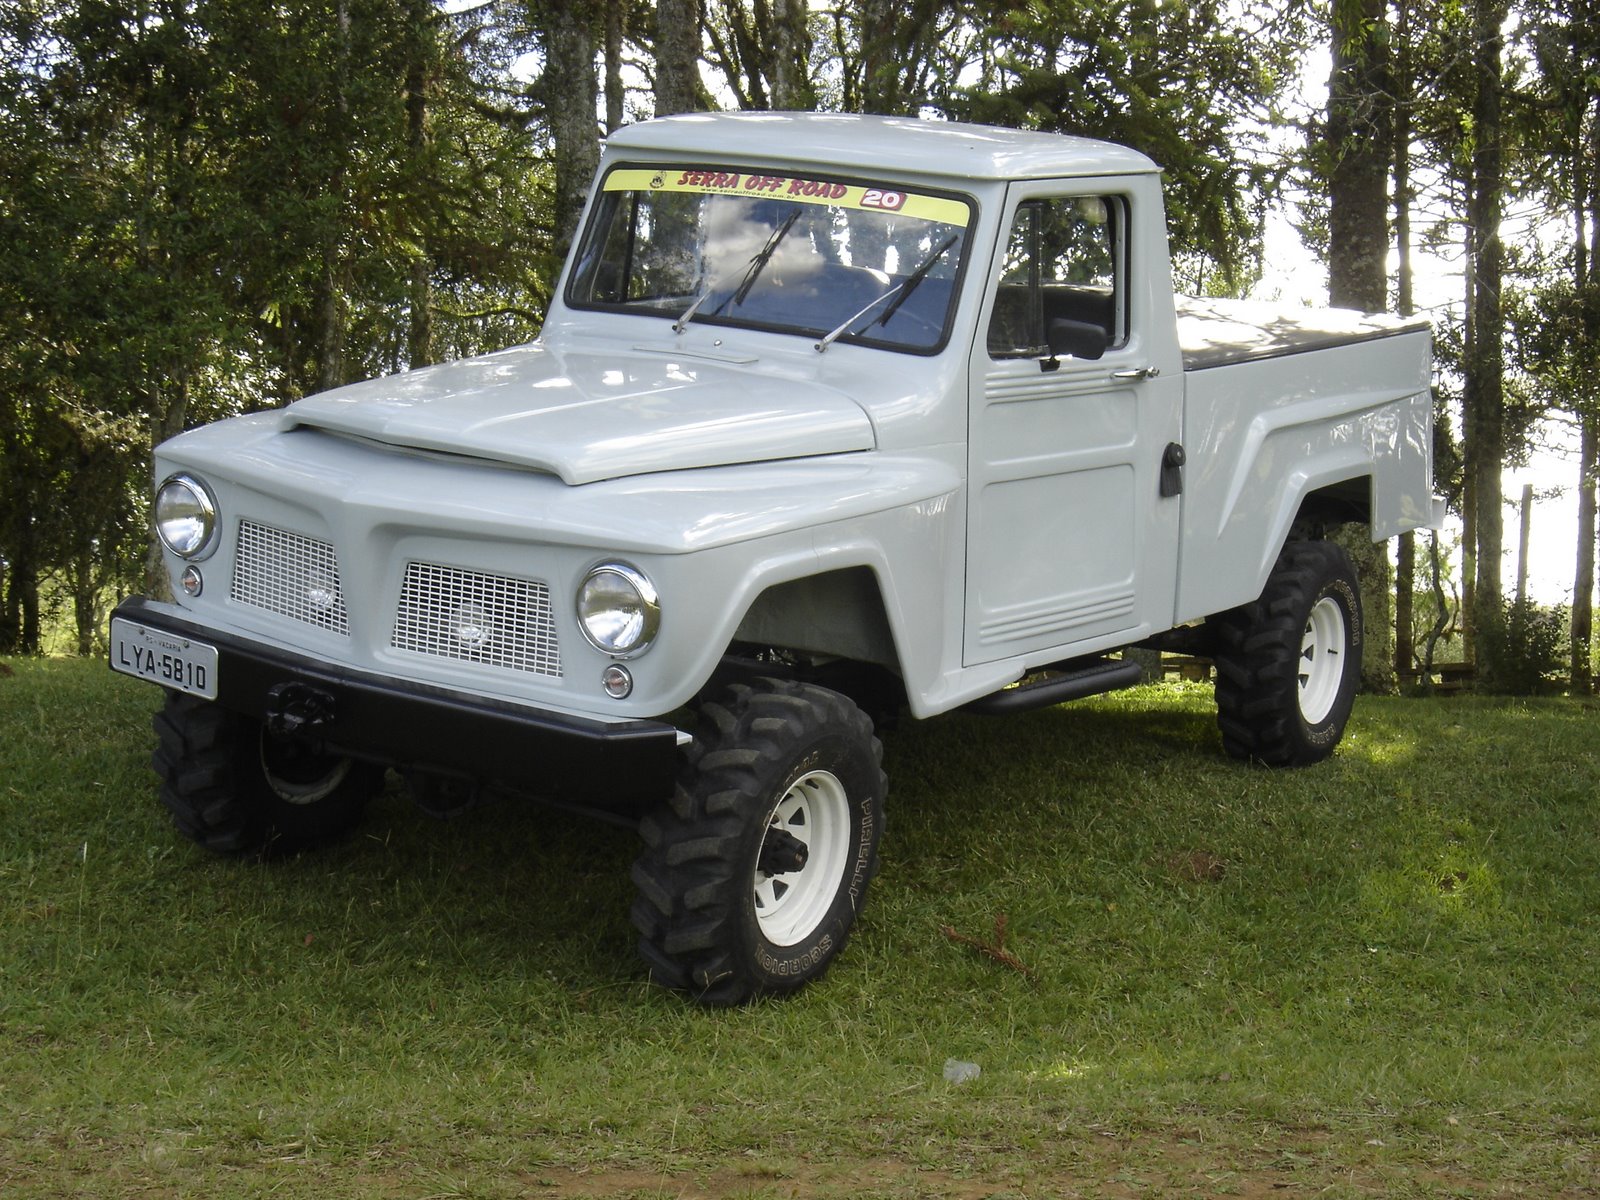 Ford F-75